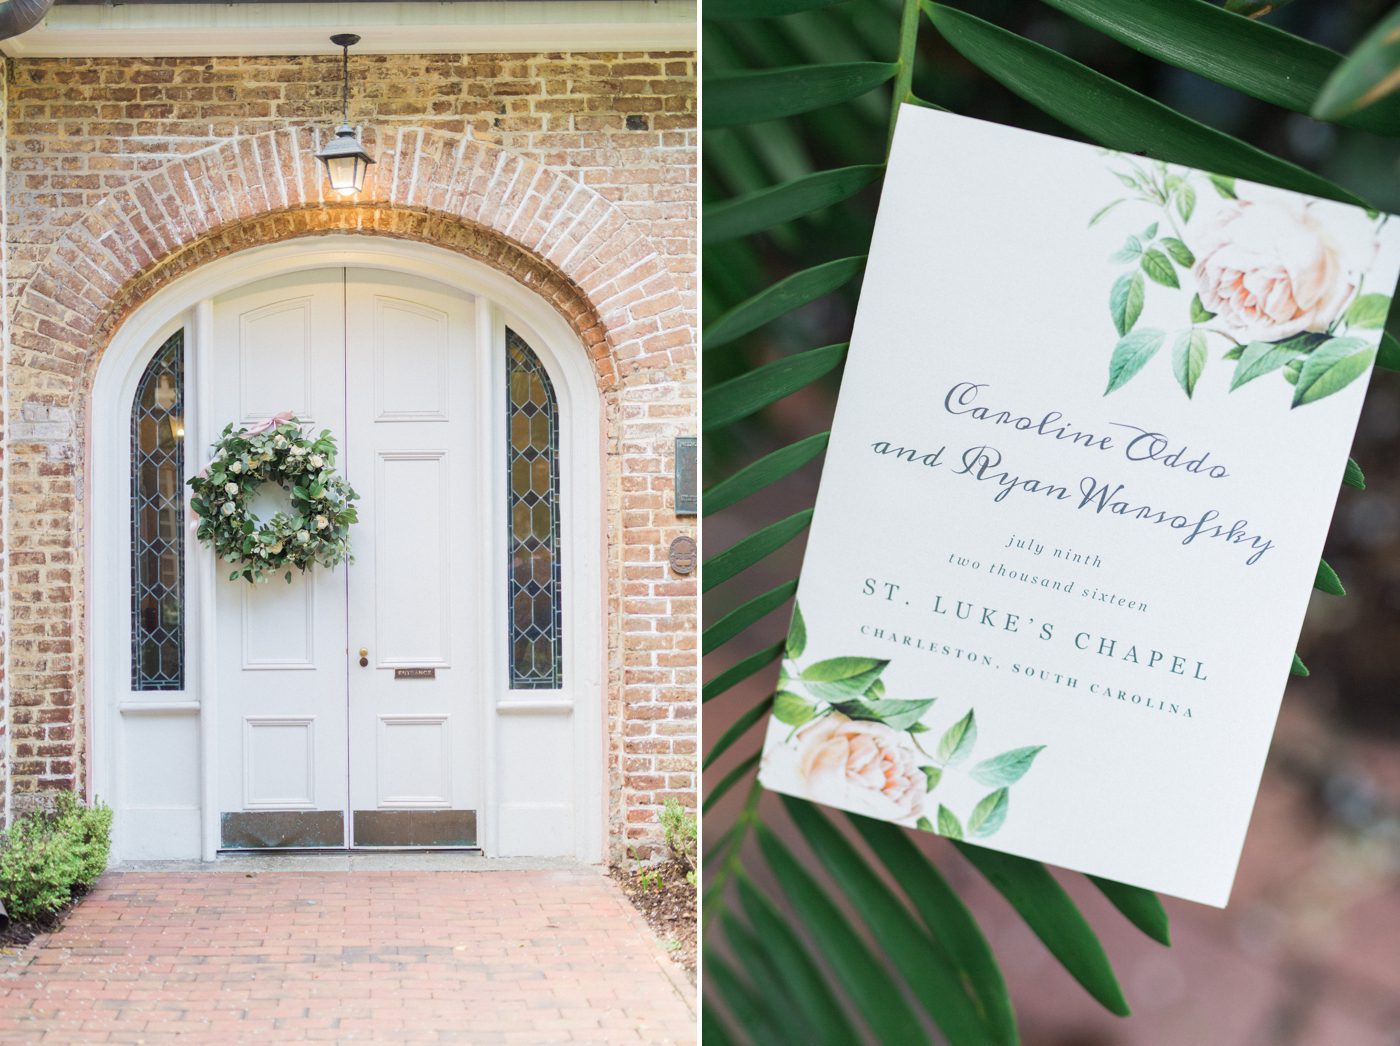 Charleston SC St Lukes Chapel at MUSC with wreath hanging on the door. Photo by Catherine Ann Photography